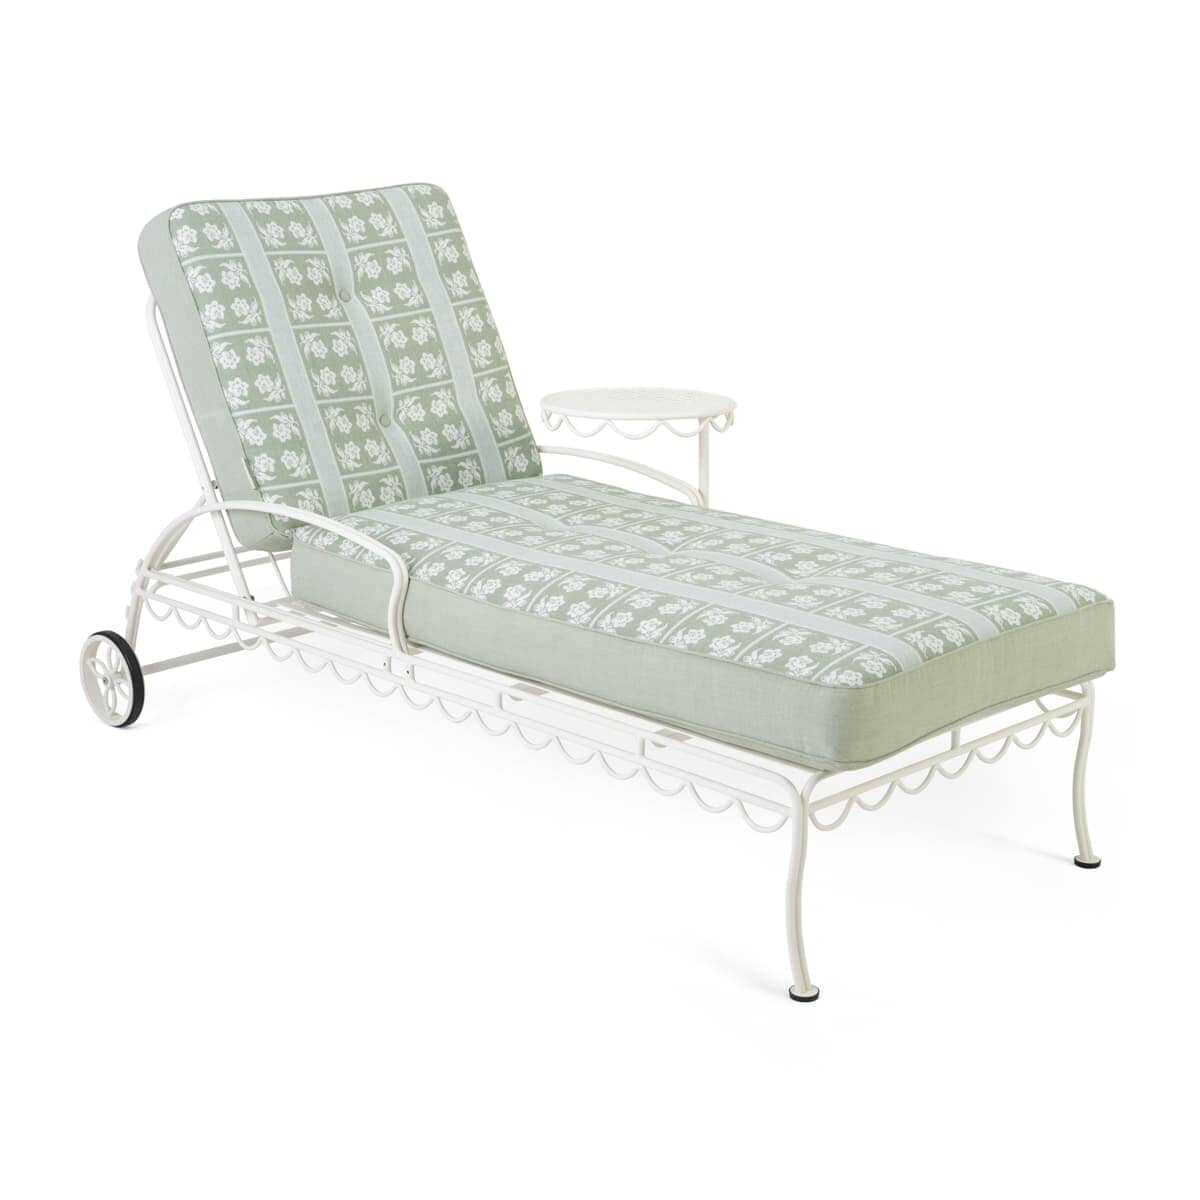 Studio image of sun lounger with cushion